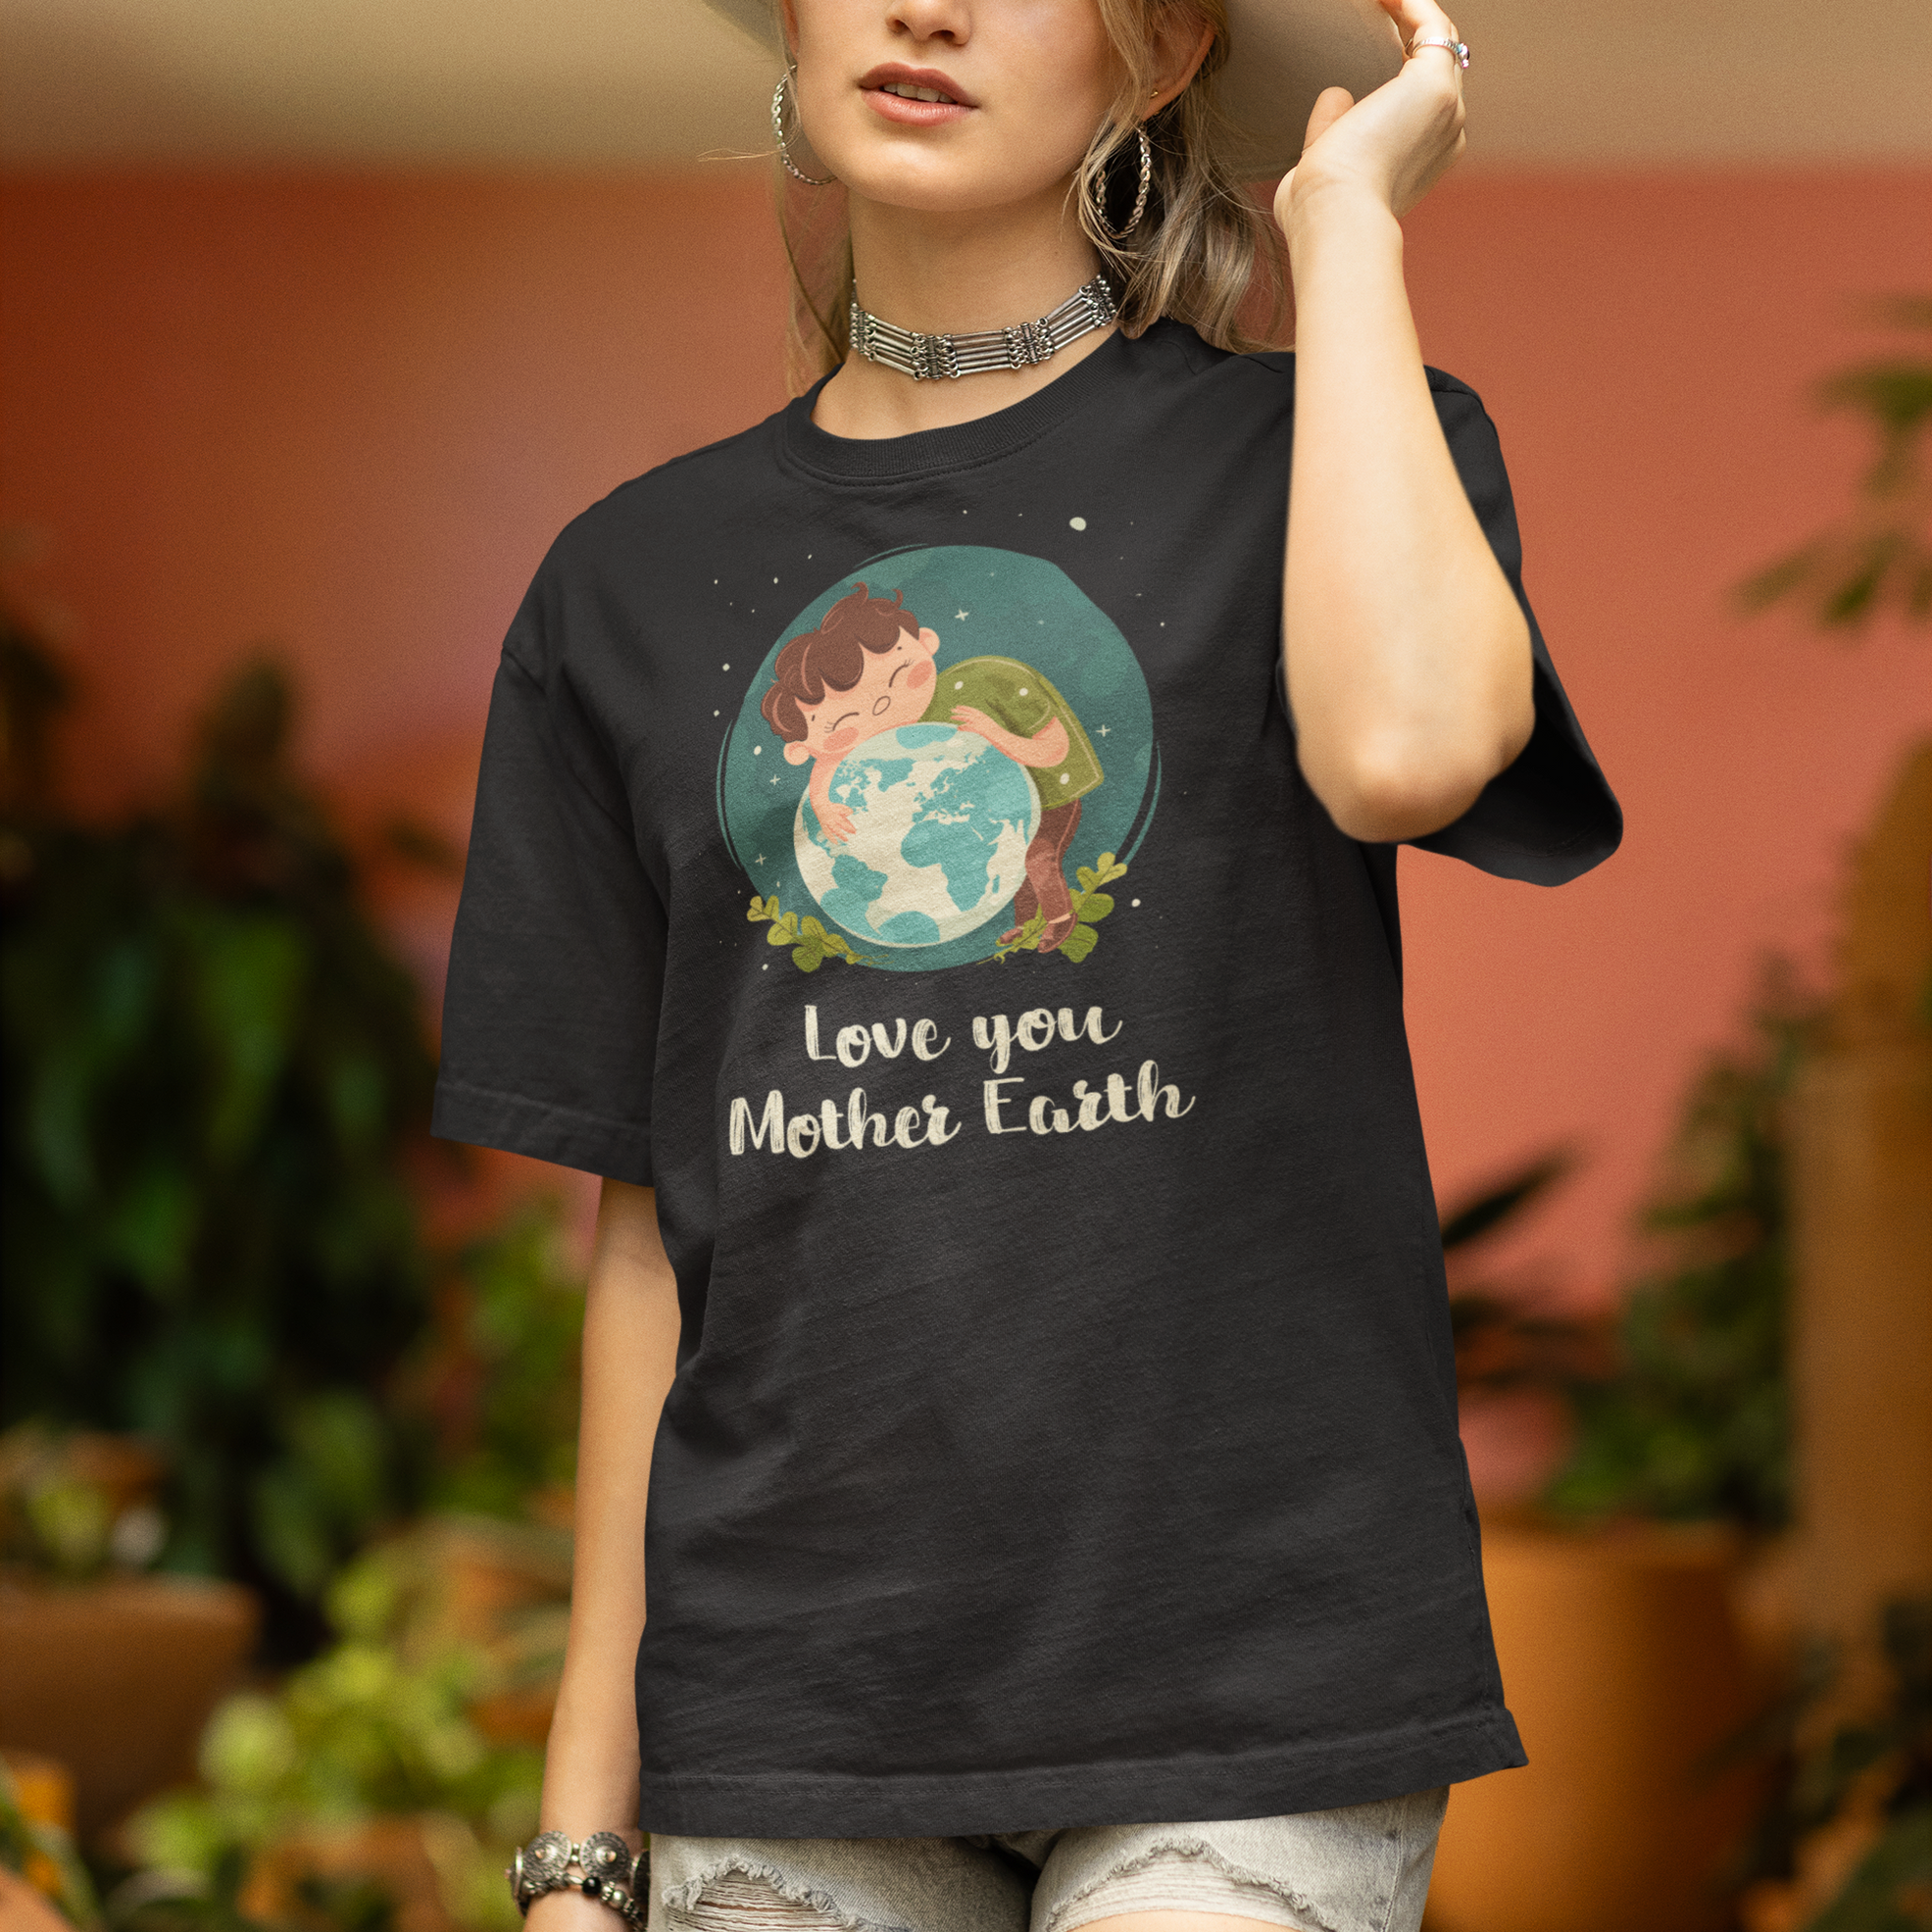 "Embrace Earth: Love You Mother Earth " Women's Cotton Oversized T-Shirt